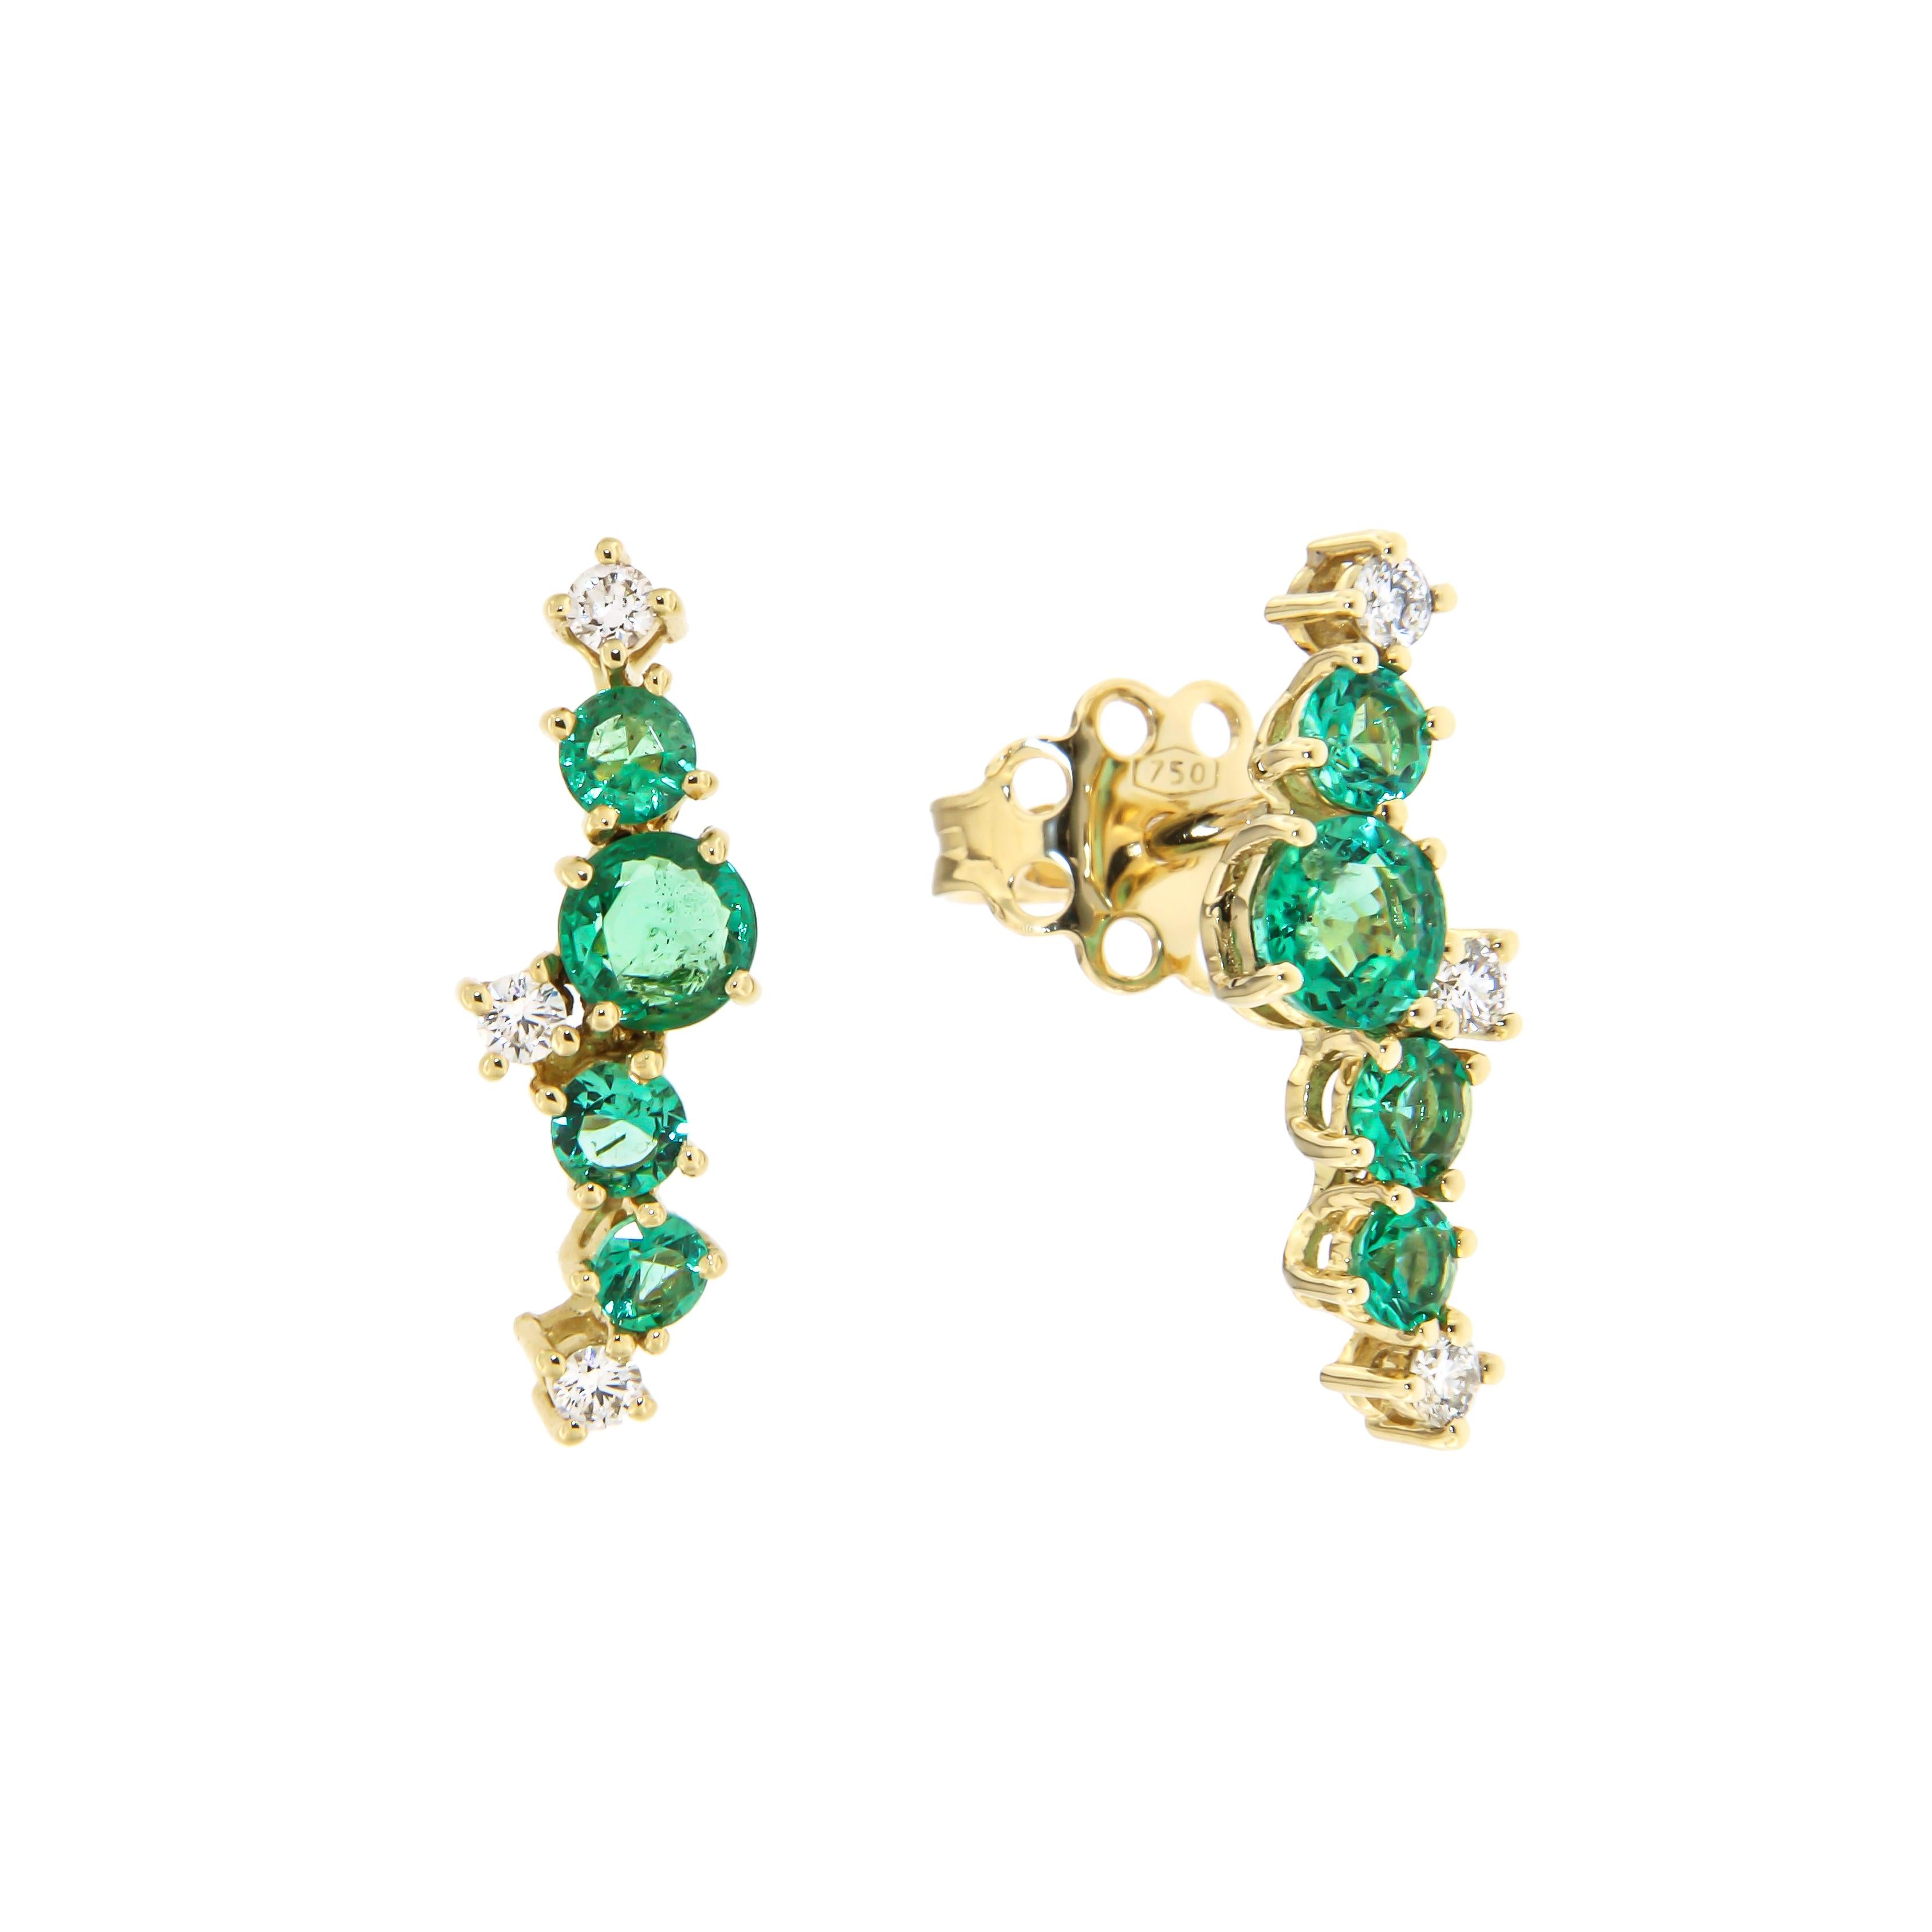 Fancy Natural Emerald 18k Diamonds Yellow Gold Earrings for Her